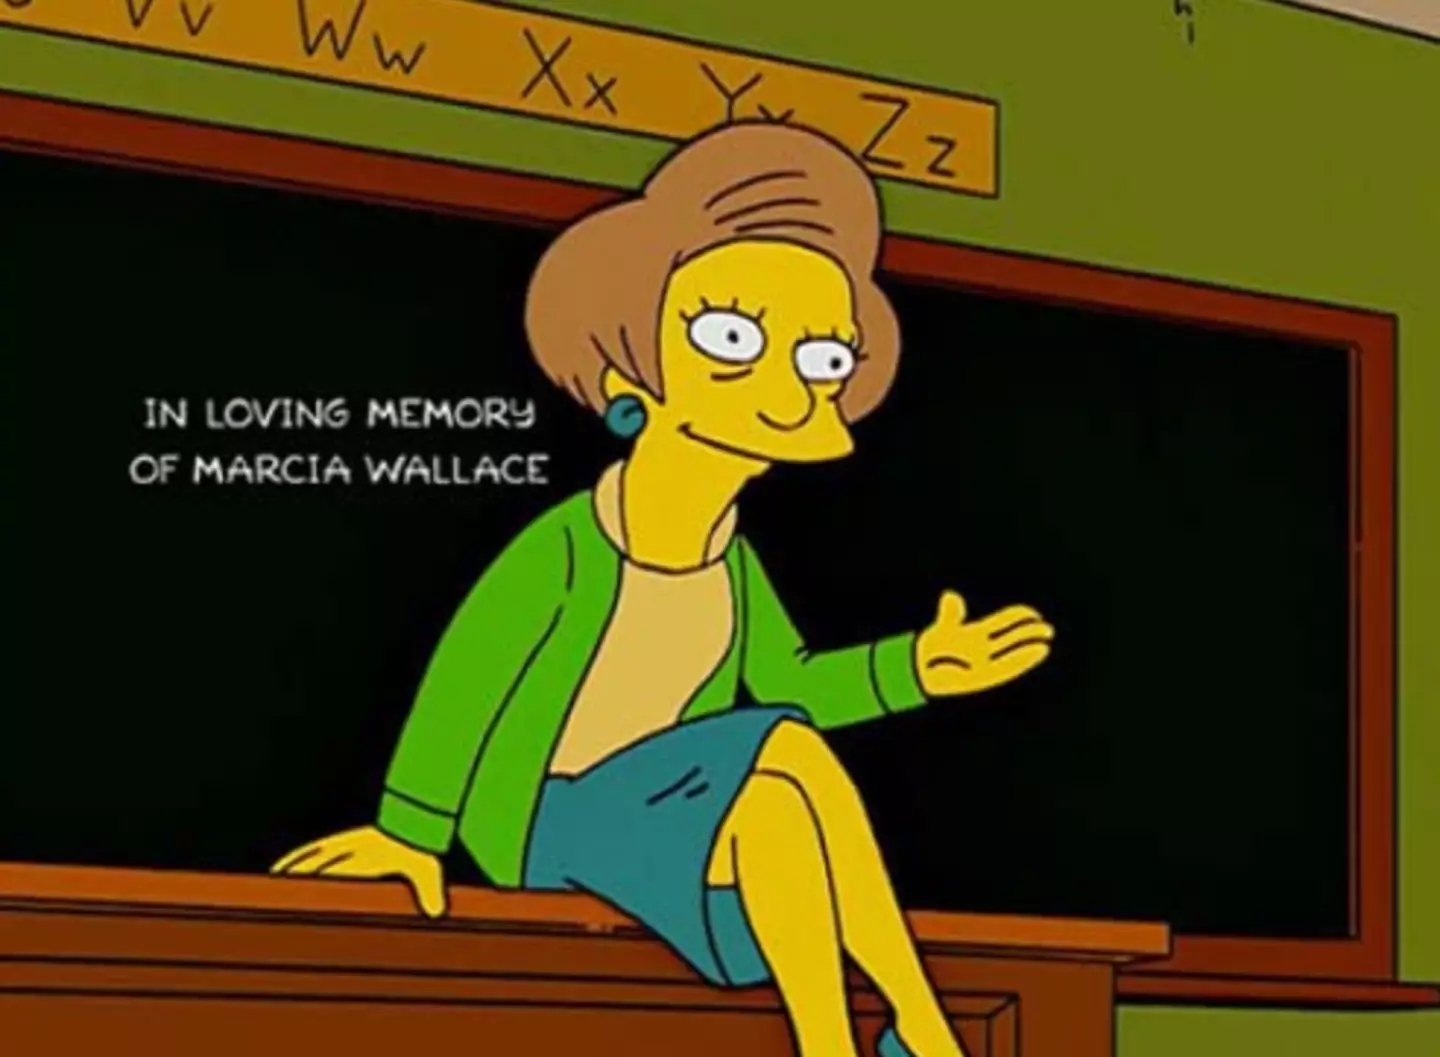 The loss of Marcia Wallace was a massive blow to the show and fans alike.